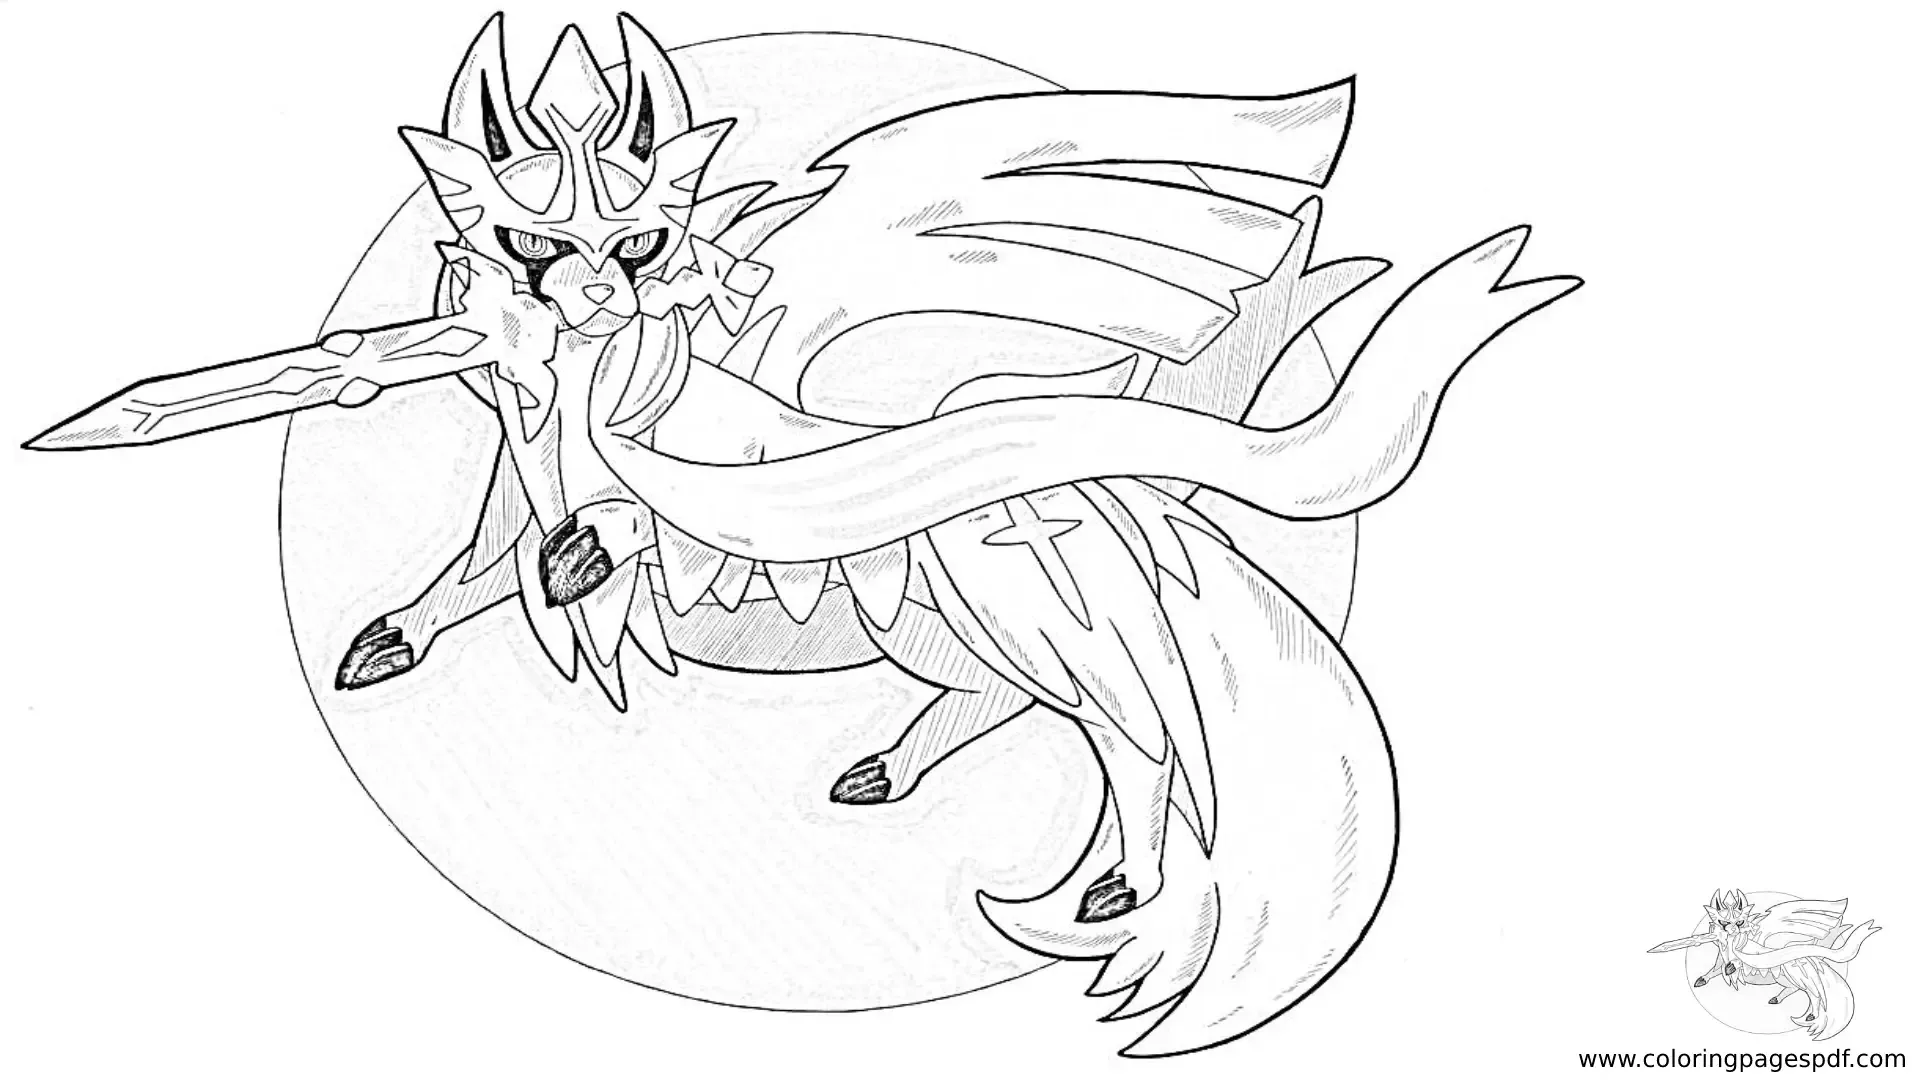 Coloring Page Of Zacian Surrounded By A Circle